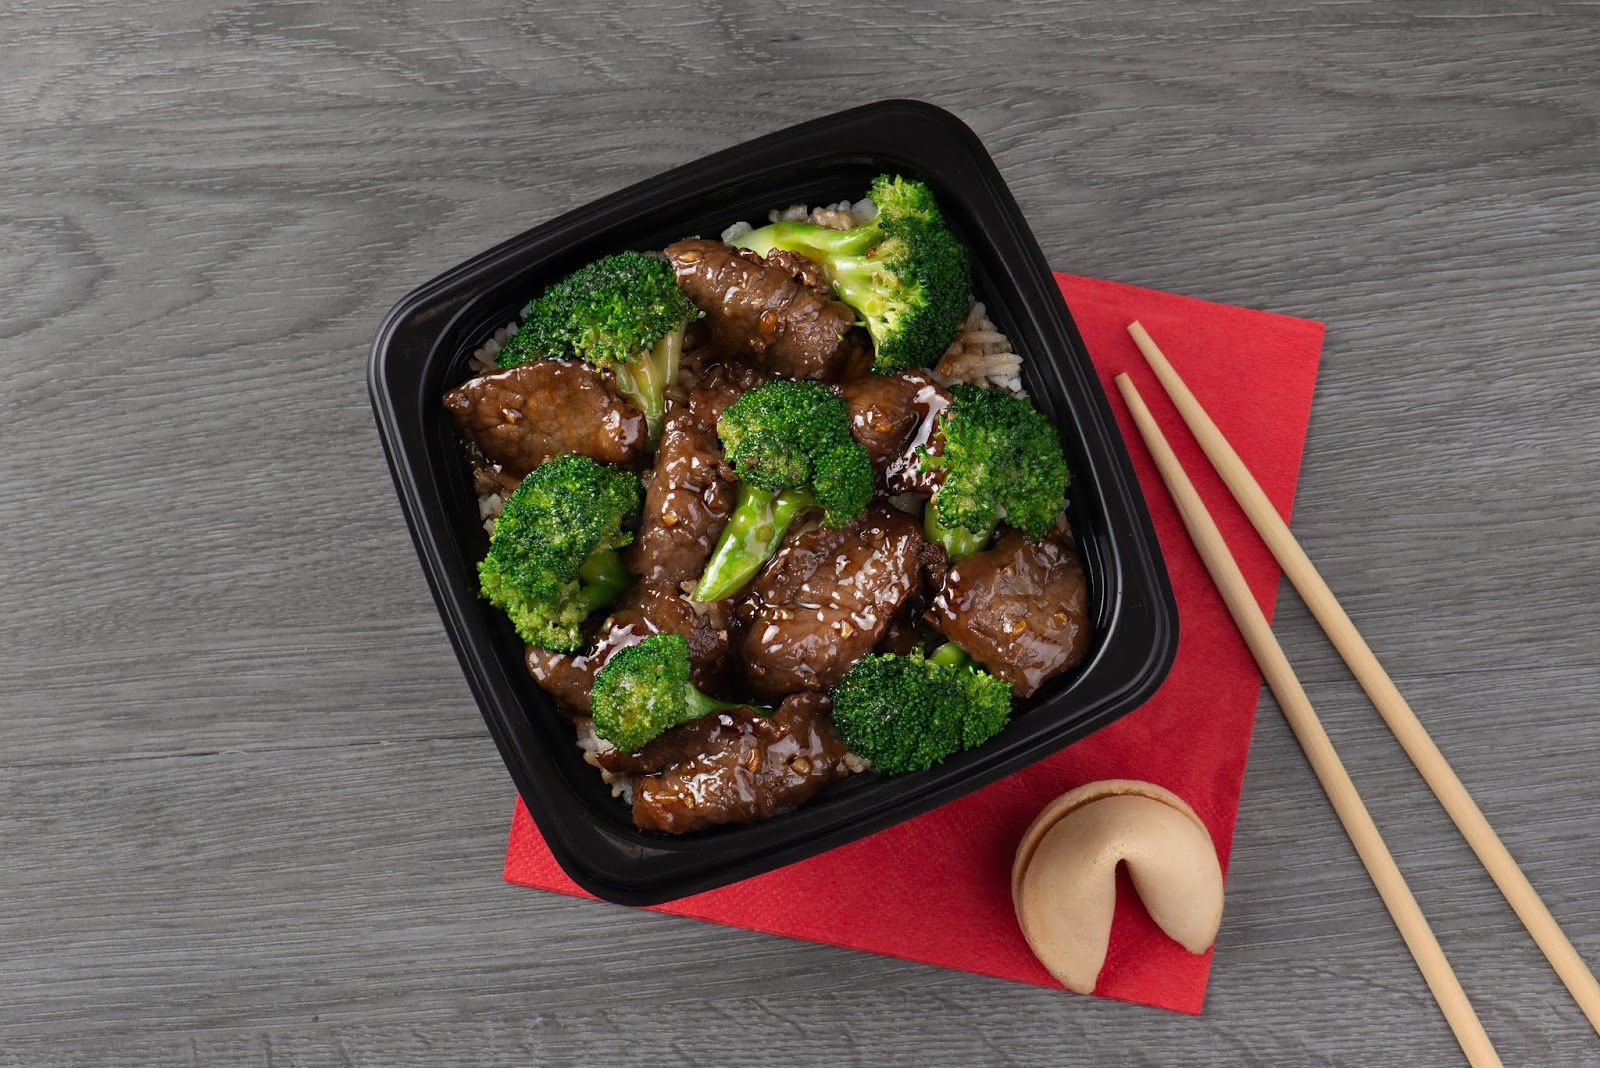 The classic favorite Broccoli Beef made of tender beef and fresh broccoli i...